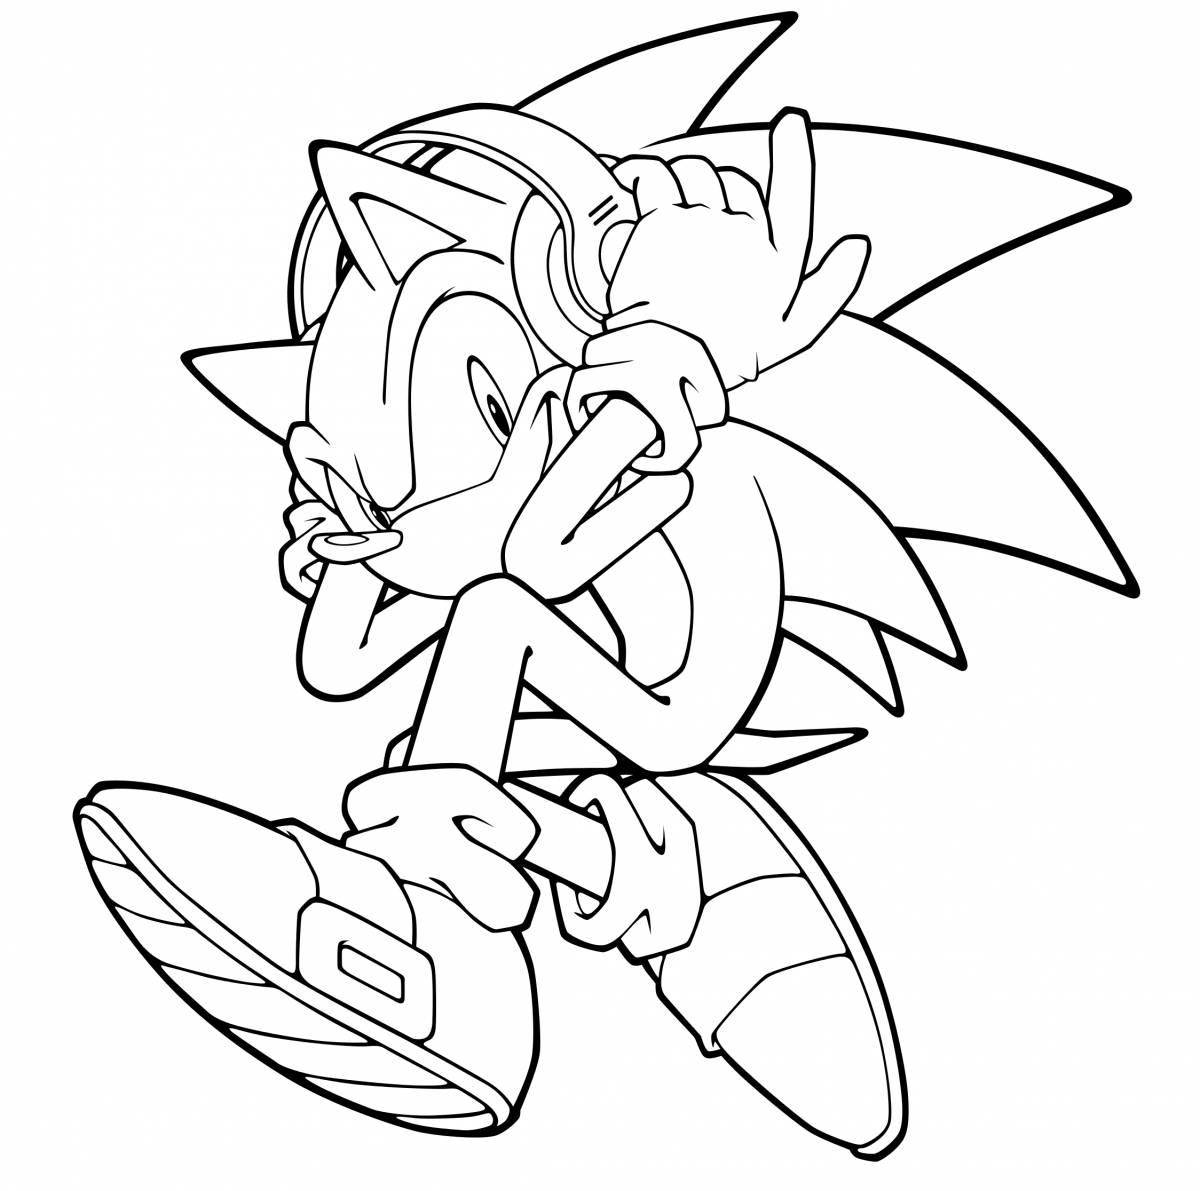 Super sonic spectacular coloring